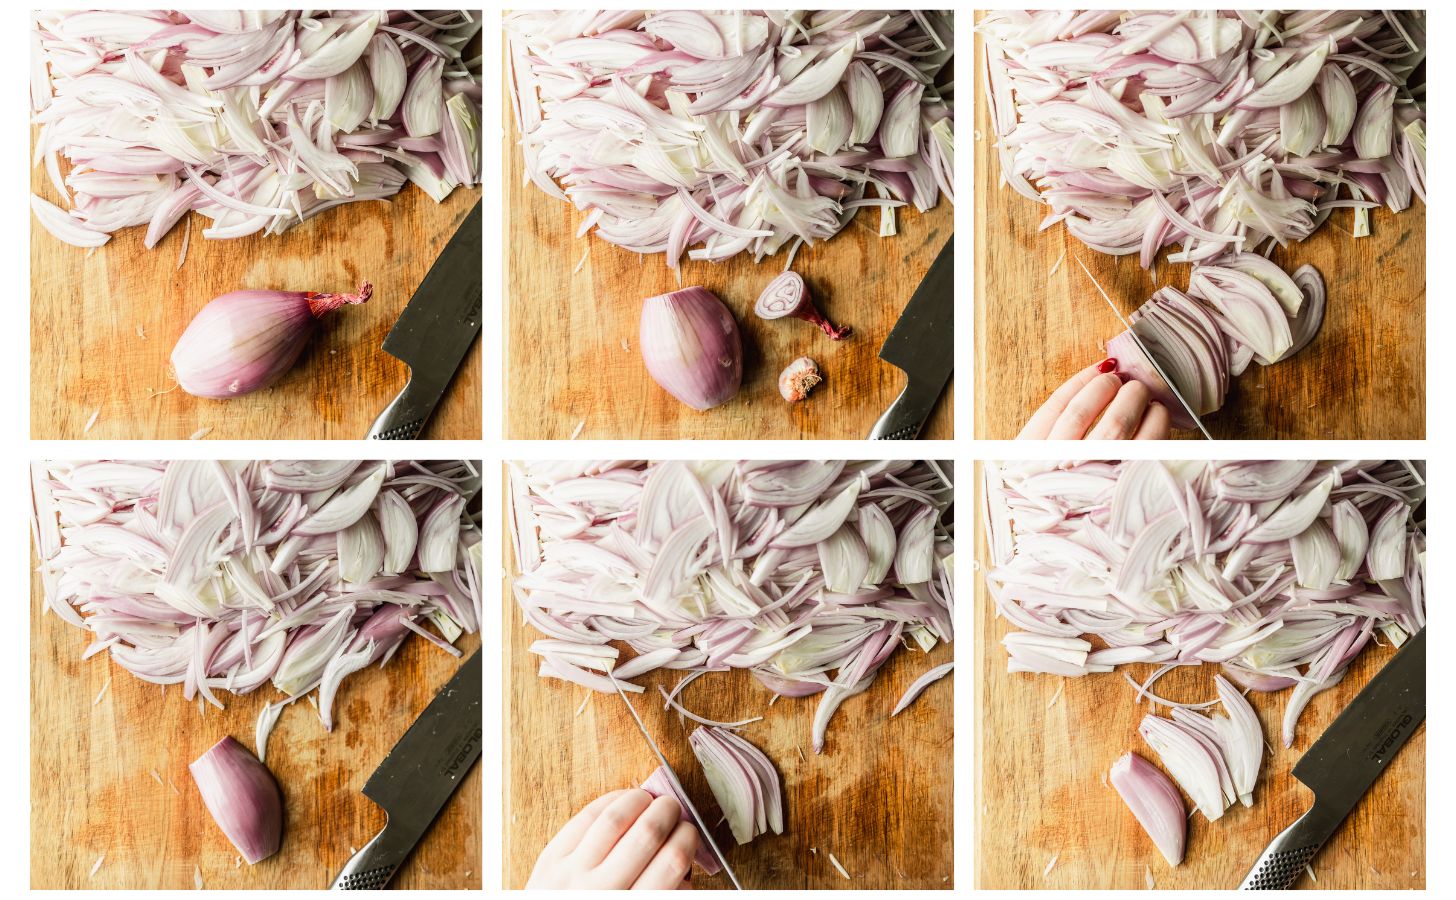 Six steps on how to cut shallots. In photo 1, a full shallot on a wood board. In photo 2, the shallot is cut at both ends. In photo 3, a hand is slicing the shallots. In photo 4, the shallot has been turned. In photo 5, a hand slices the shallots more. In photo 6, the shallots are sliced.